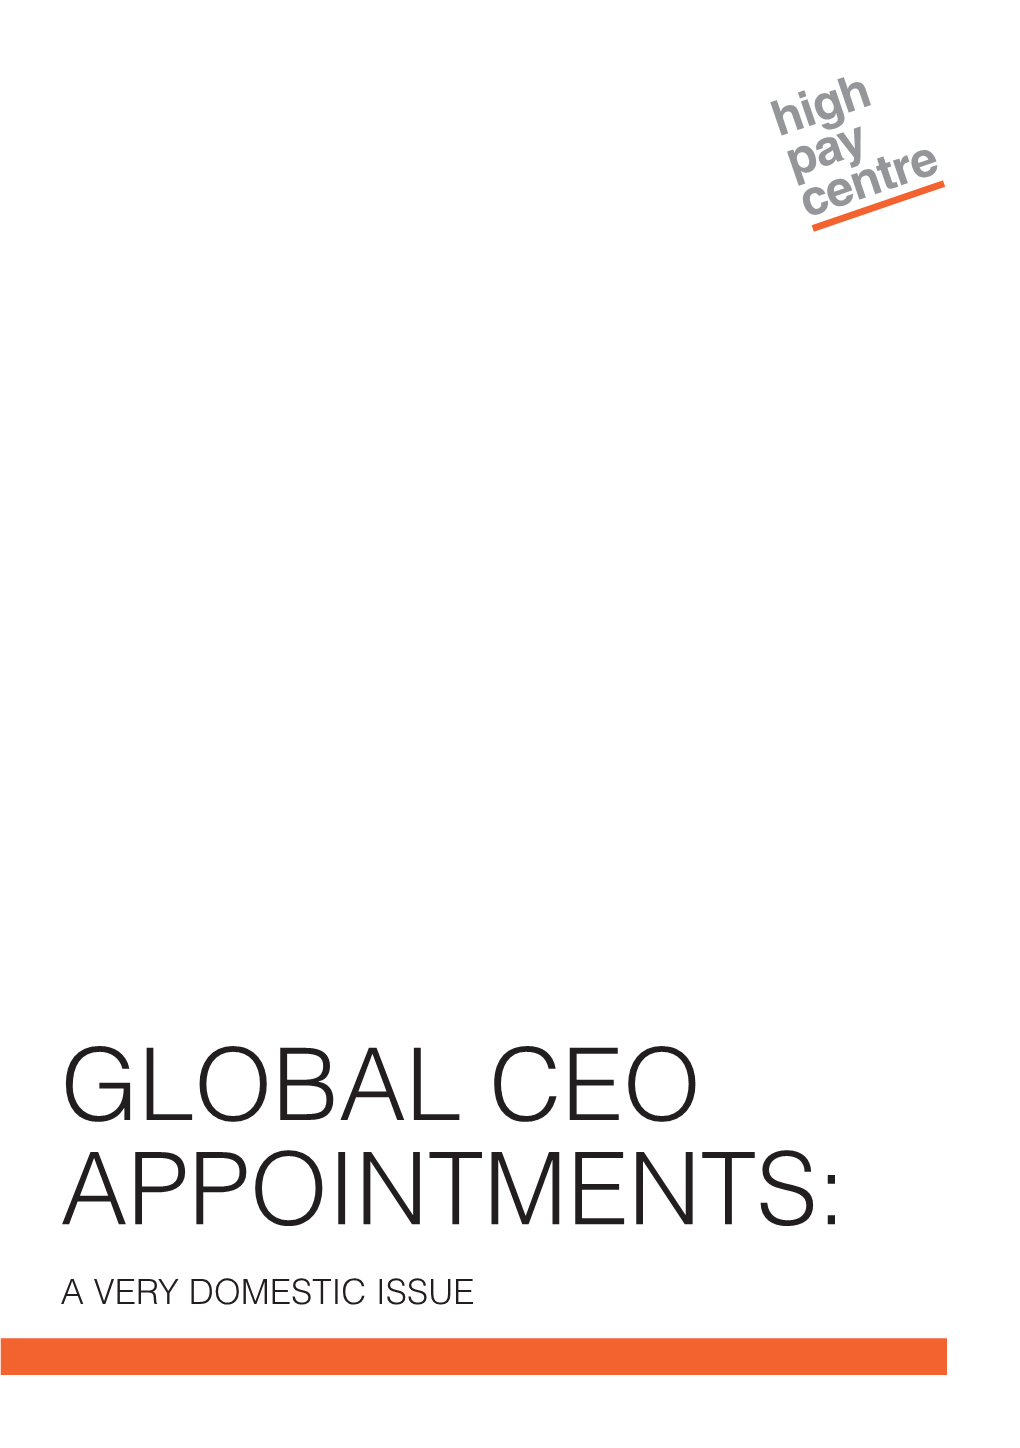 Global CEO Appointments: About the High Pay Centre Contents a Very Domestic Issue